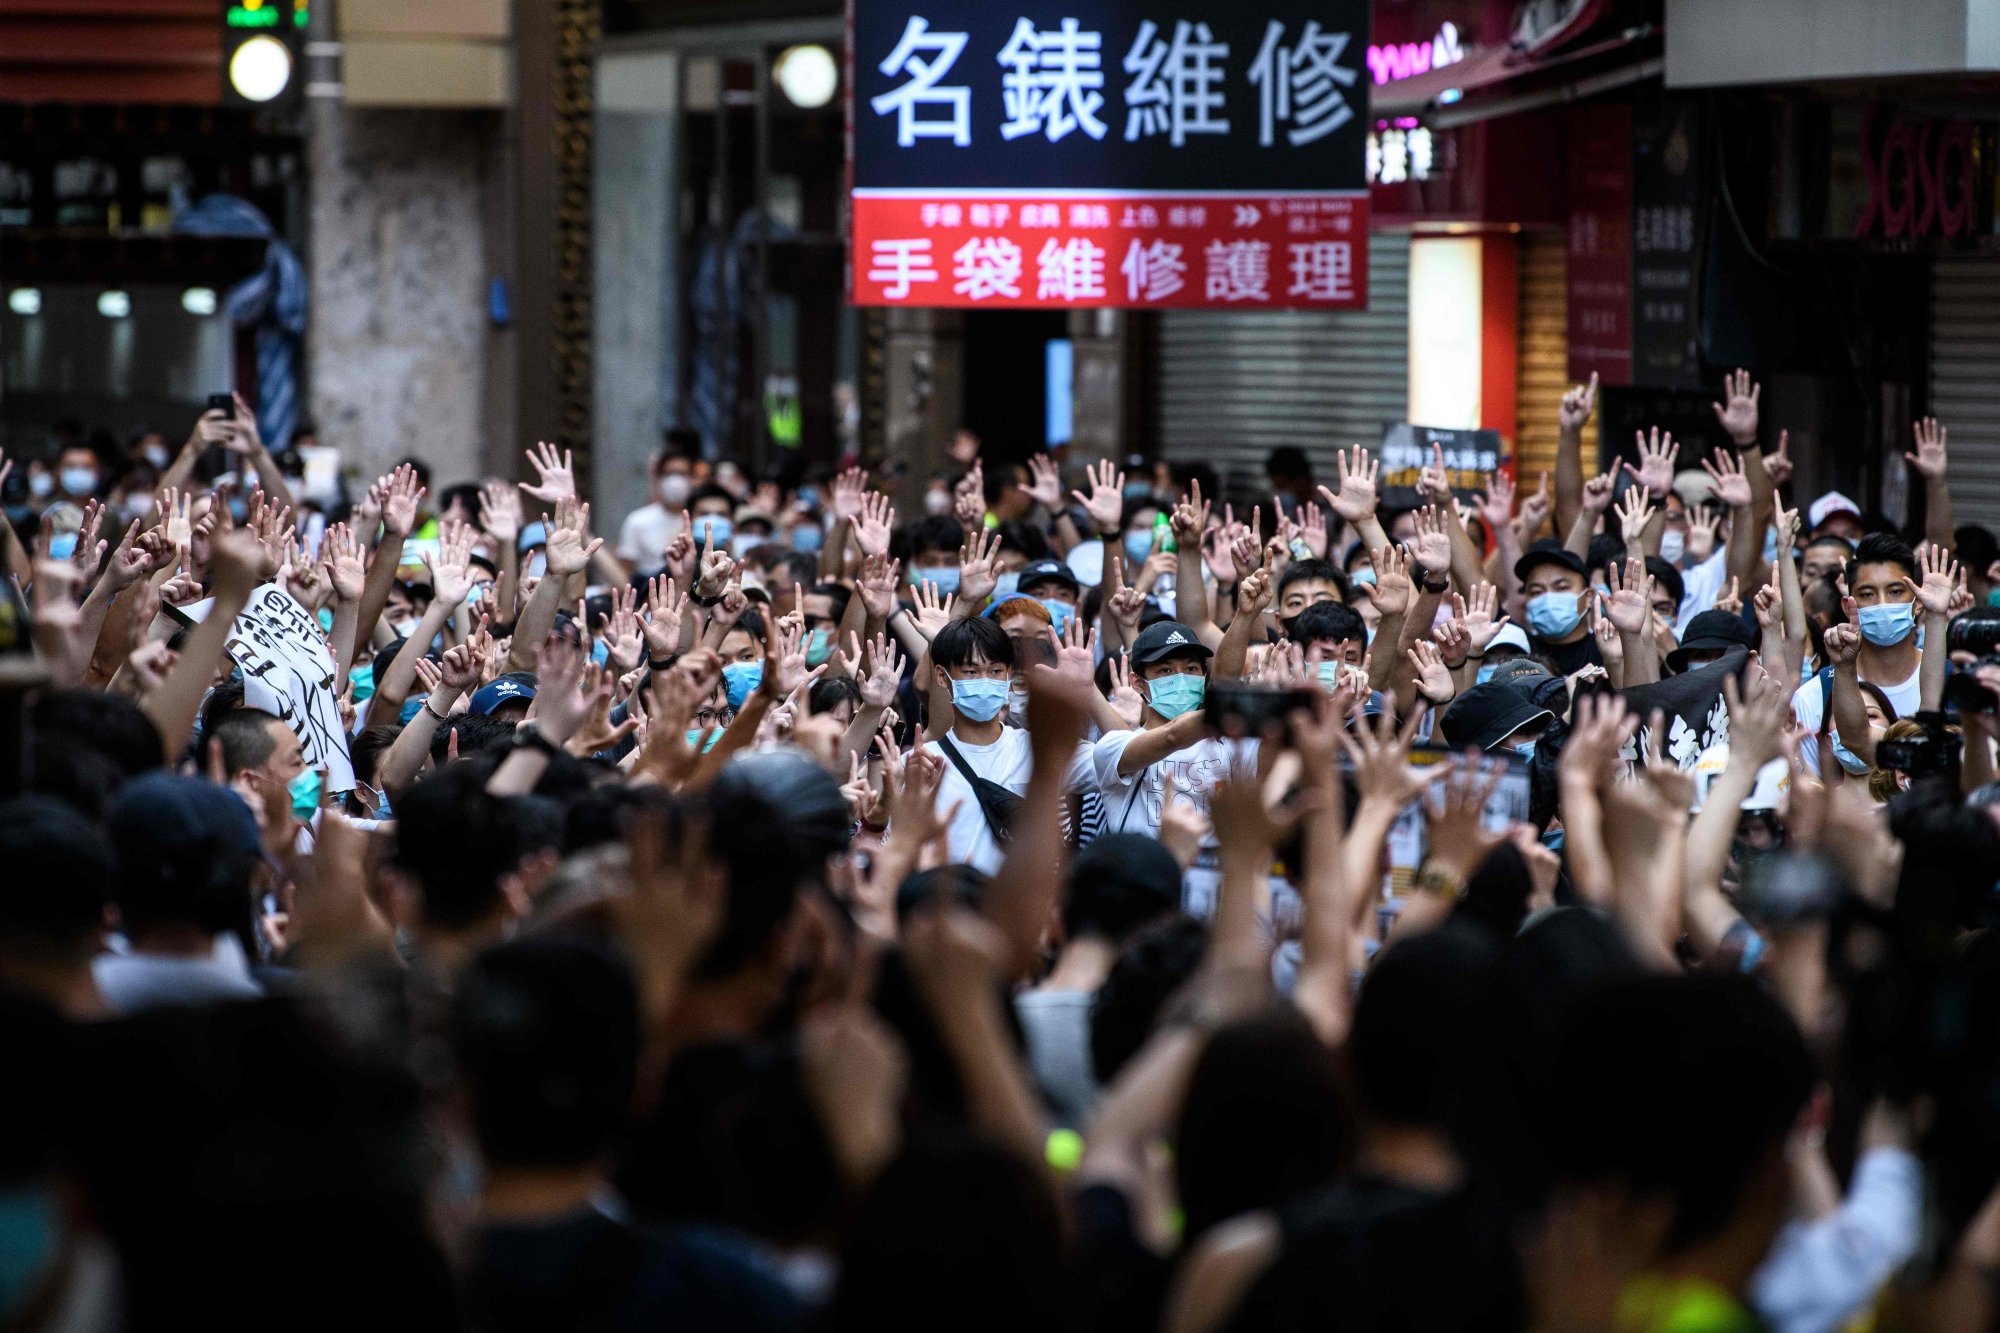 A protest in Hong Kong on July 1 2020 against the introduction of the national security law. Photo: AFP